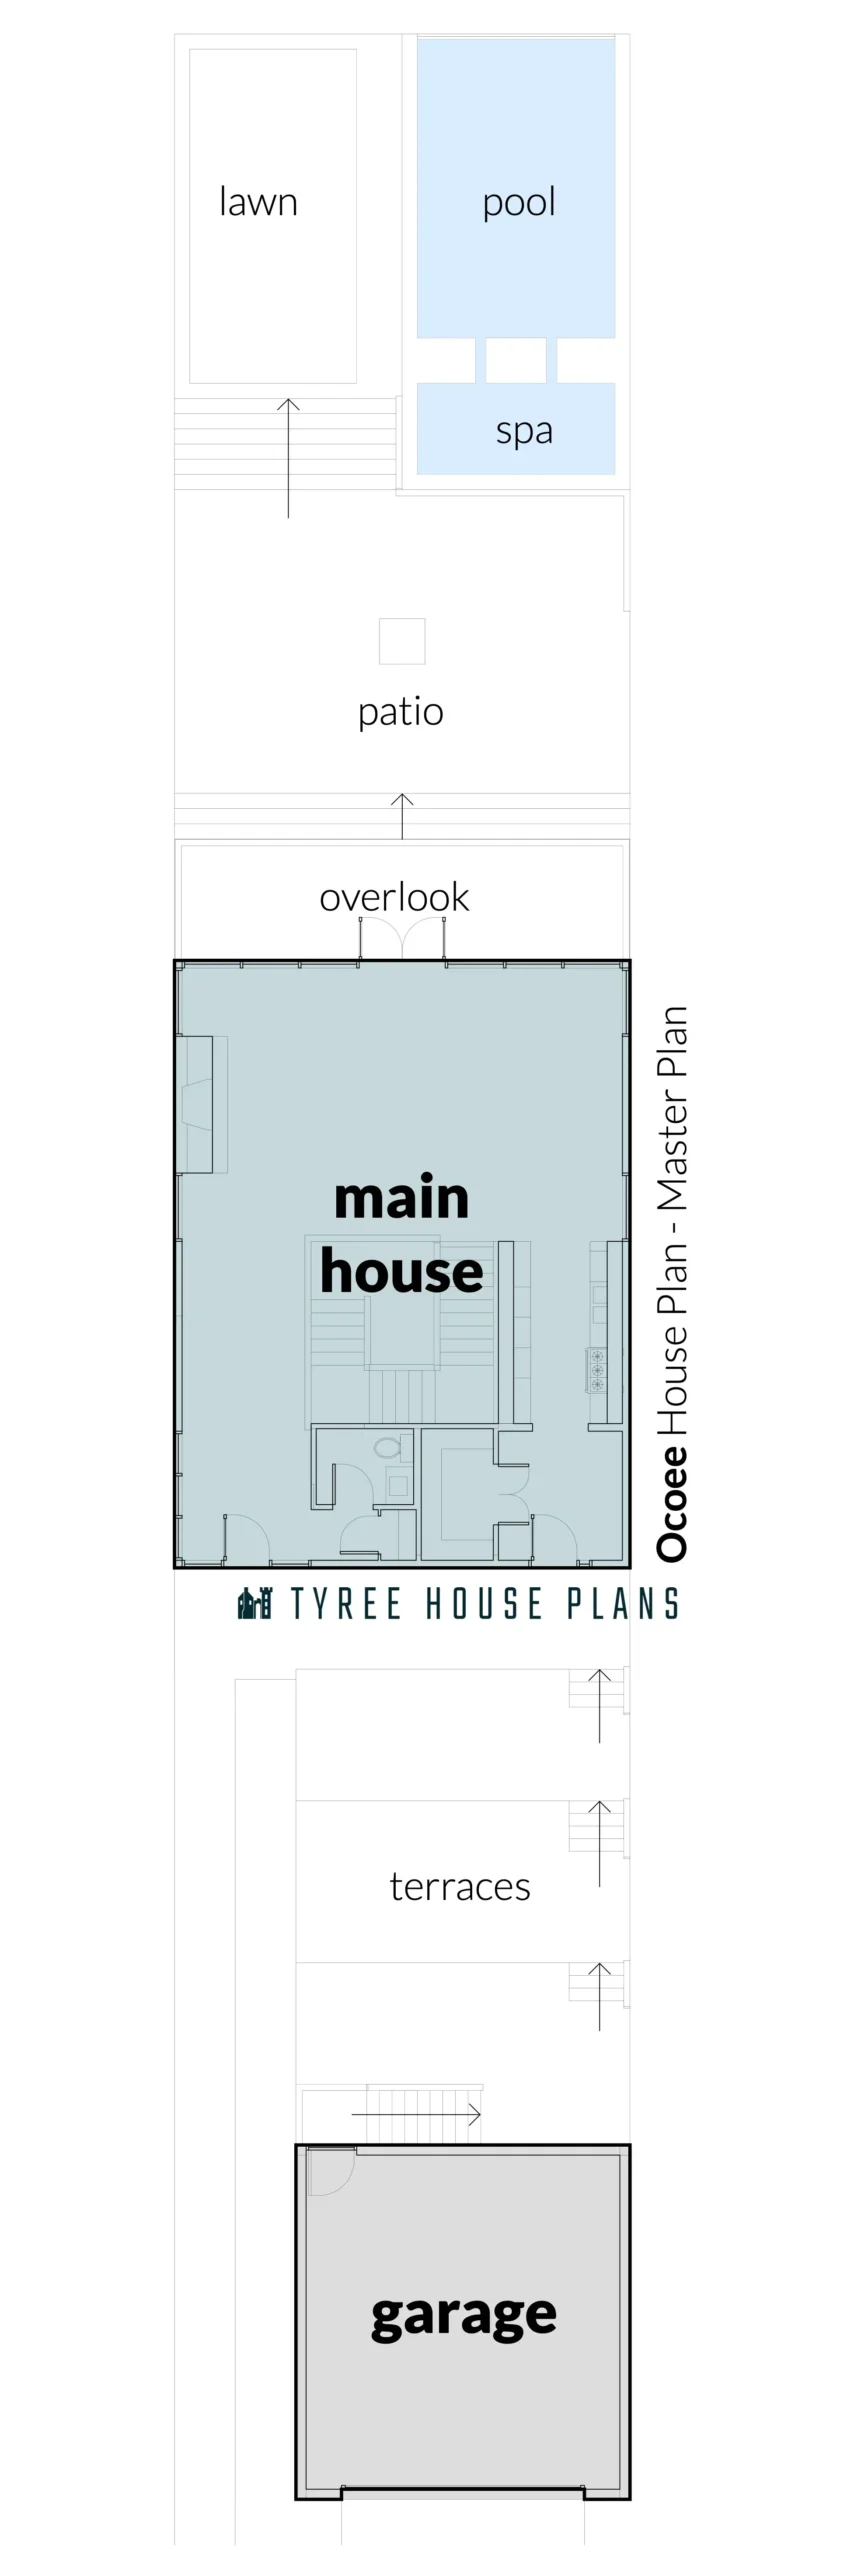 Master Site - Ocoee by Tyree House Plans